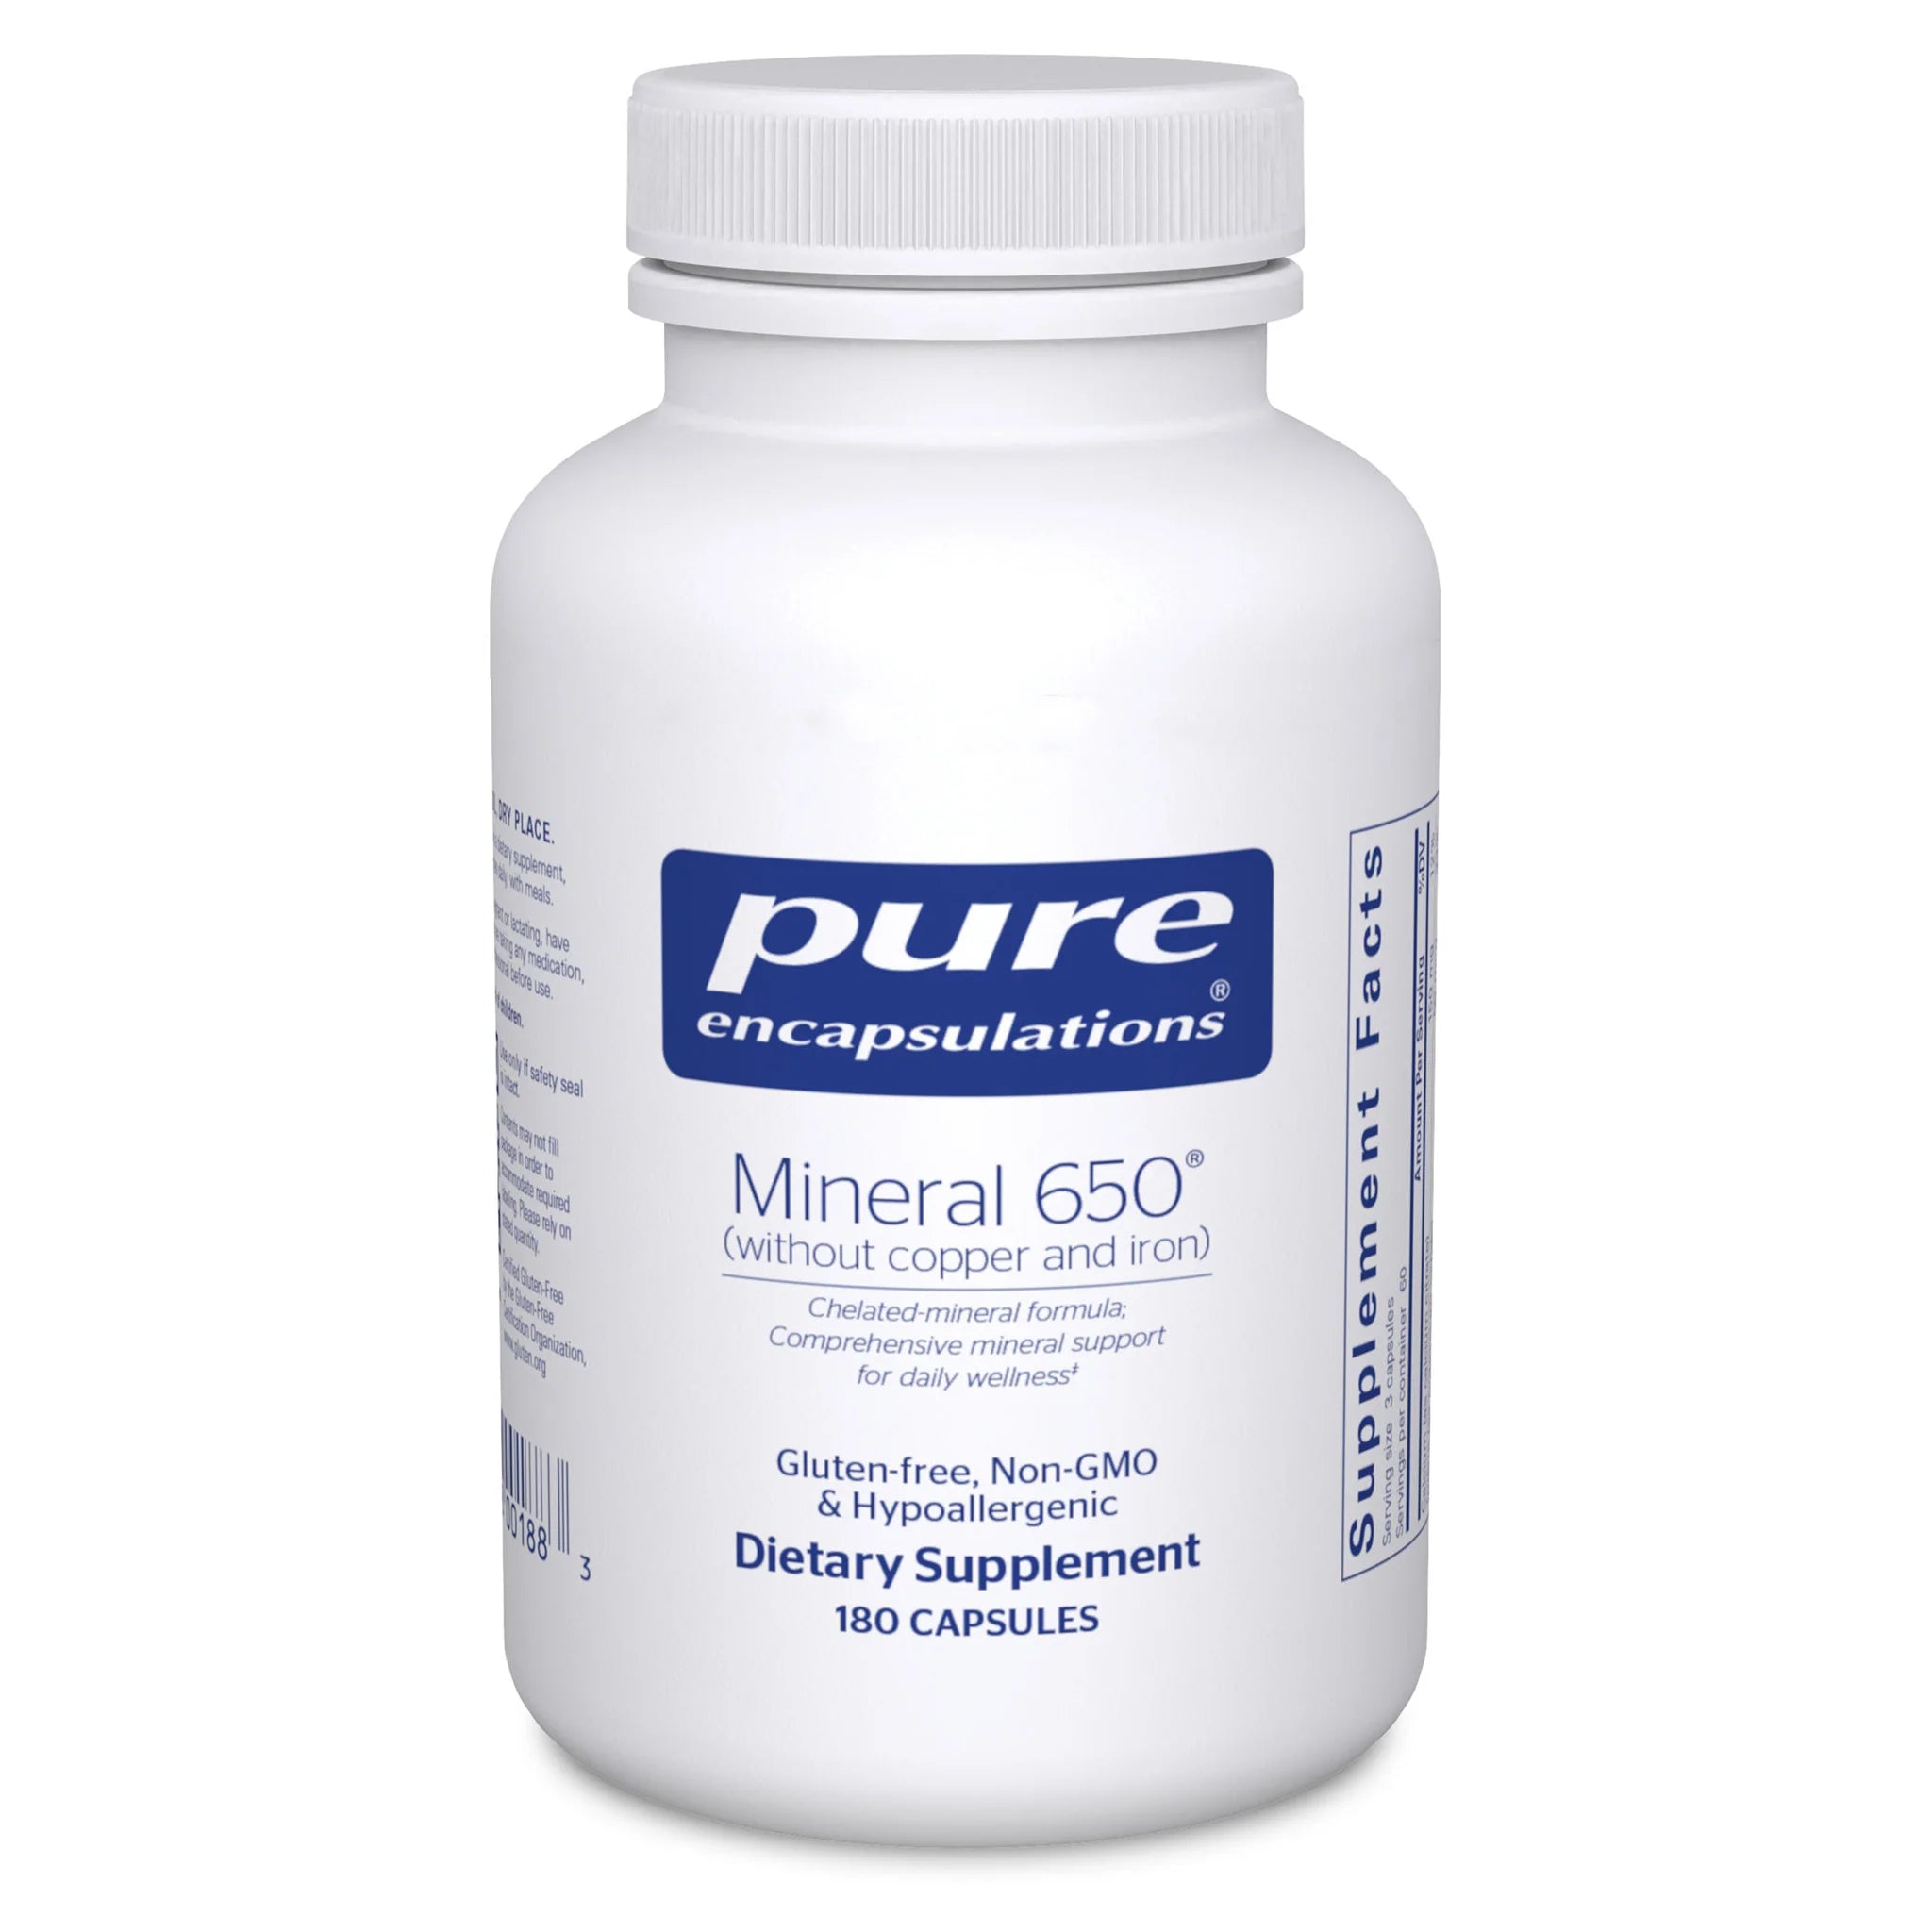 Mineral 650® (without copper and iron)